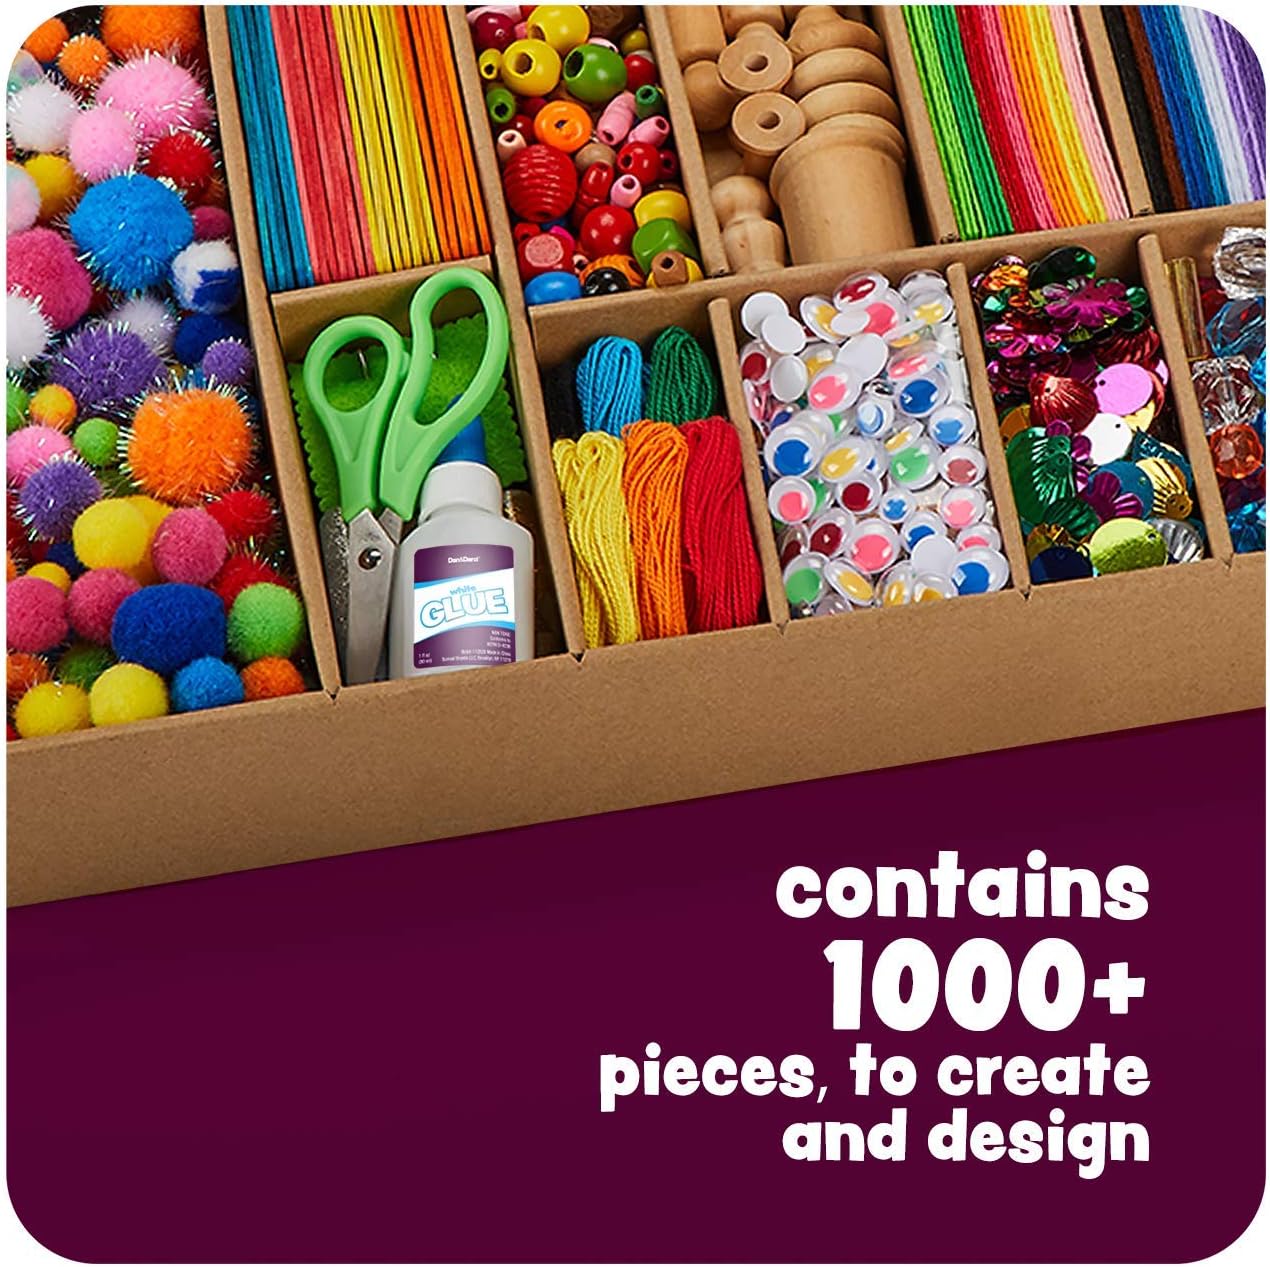 Arts and Crafts Vault - 1000+ Piece Craft Supplies Kit Library in a Box for Kids Ages 4 5 6 7 8 9 10 11 & 12 Year Old Girls & Boys - Crafting Set Kits - Gift Ideas for Kids Art Project Activity Gifts